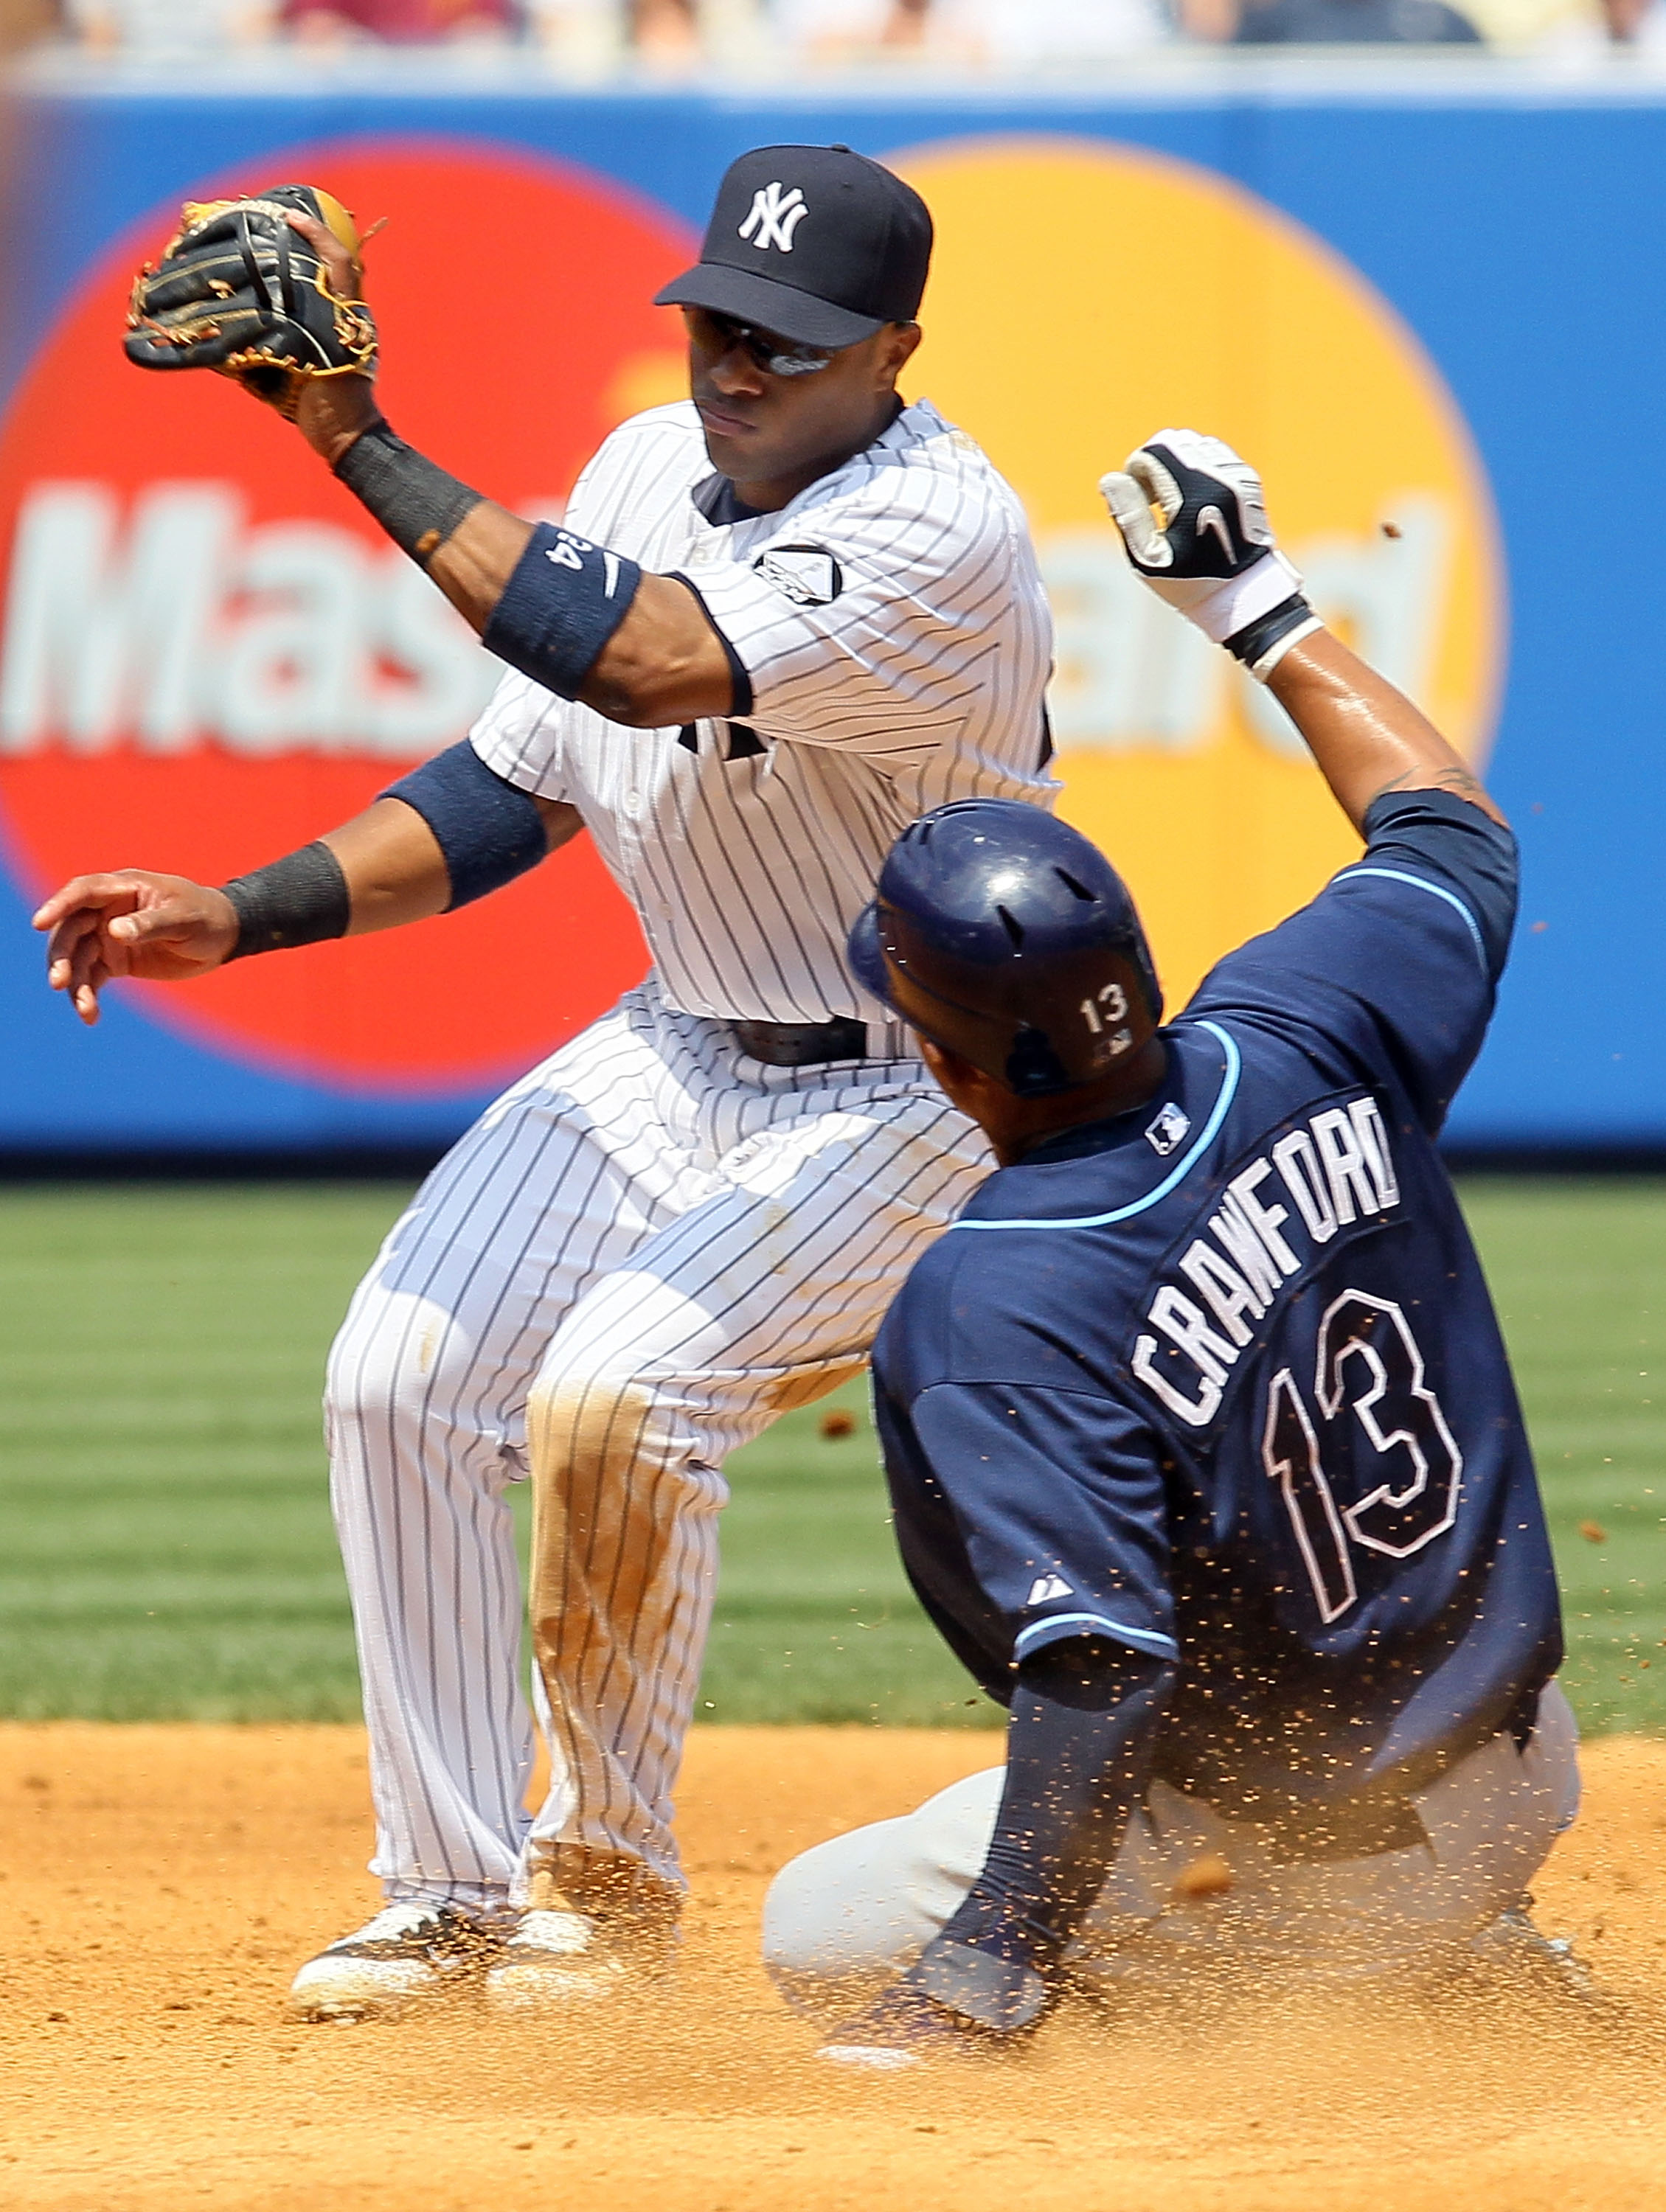 NEW YORK - JULY 18:  Robinson Cano #24 of the New York Yankees is late with the tag as Carl Crawford #13 of the Tampa Bay Rays steals second base on July 18, 2010 at Yankee Stadium in the Bronx borough of New York City.  (Photo by Jim McIsaac/Getty Images